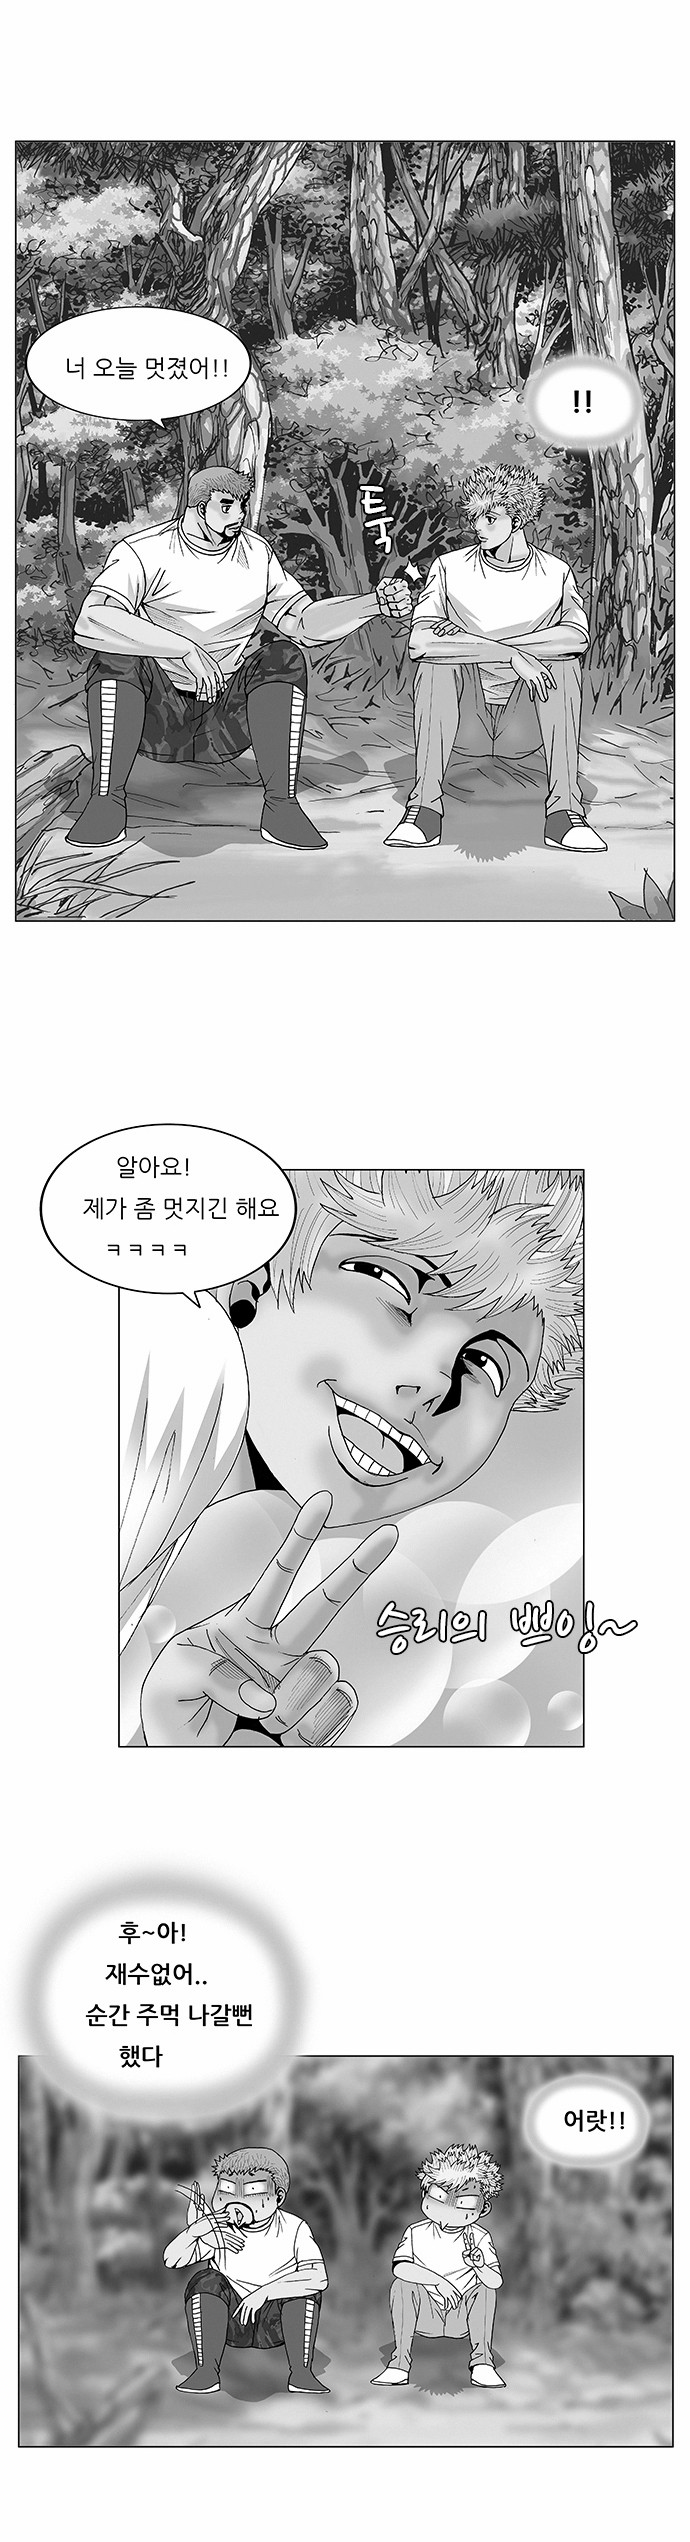 Ultimate Legend - Kang Hae Hyo - Chapter 75 - Page 1